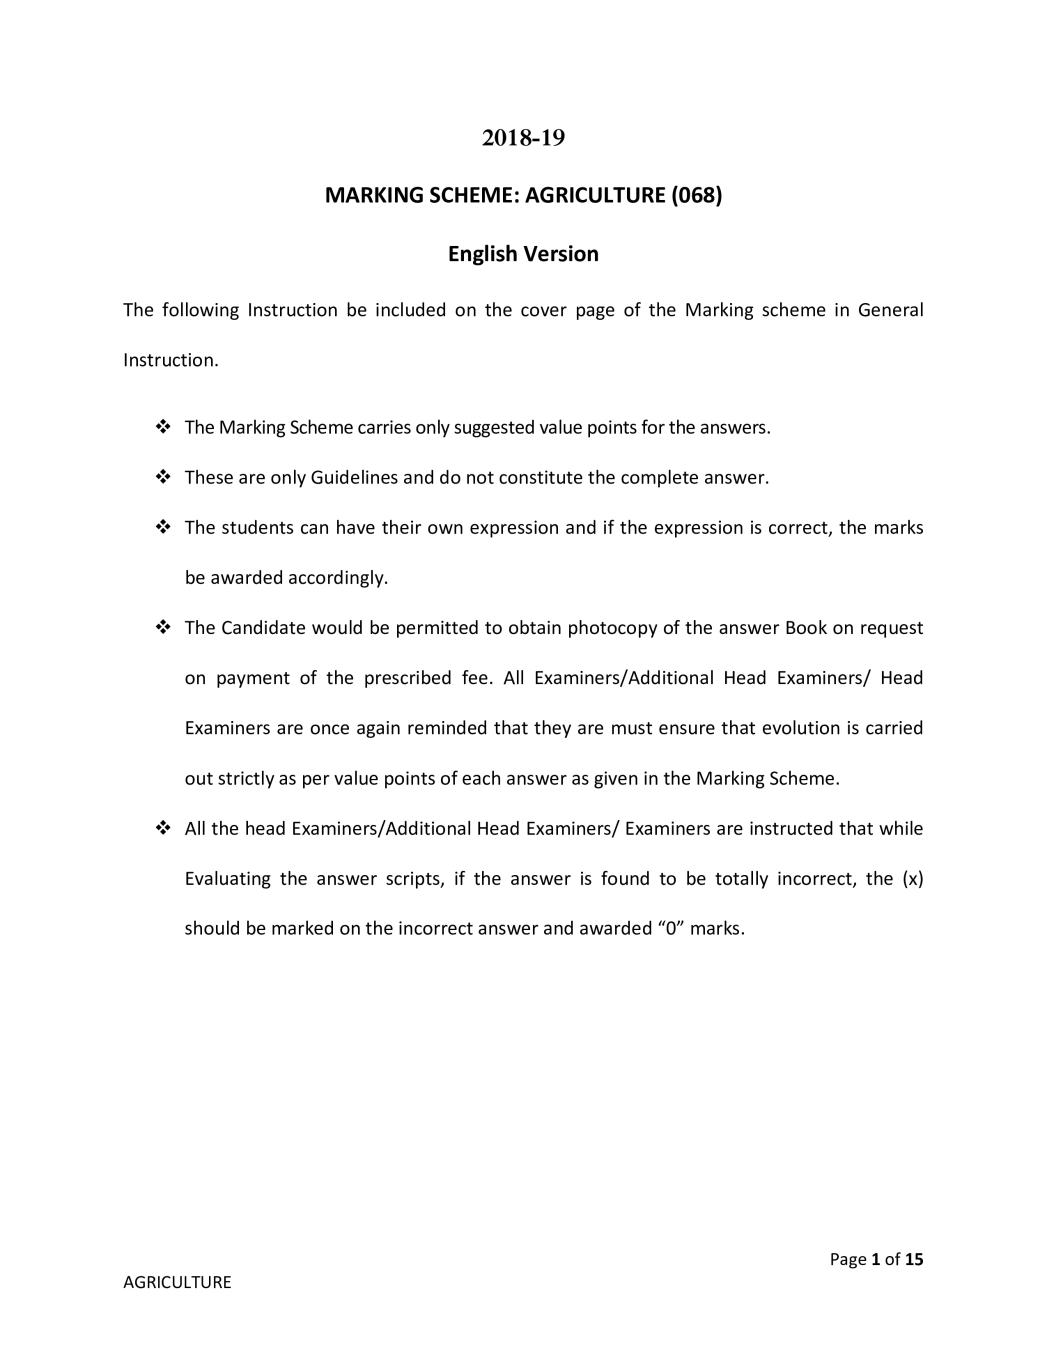 CBSE Class 12 Agriculture Question Paper 2019 Solutions - Page 1